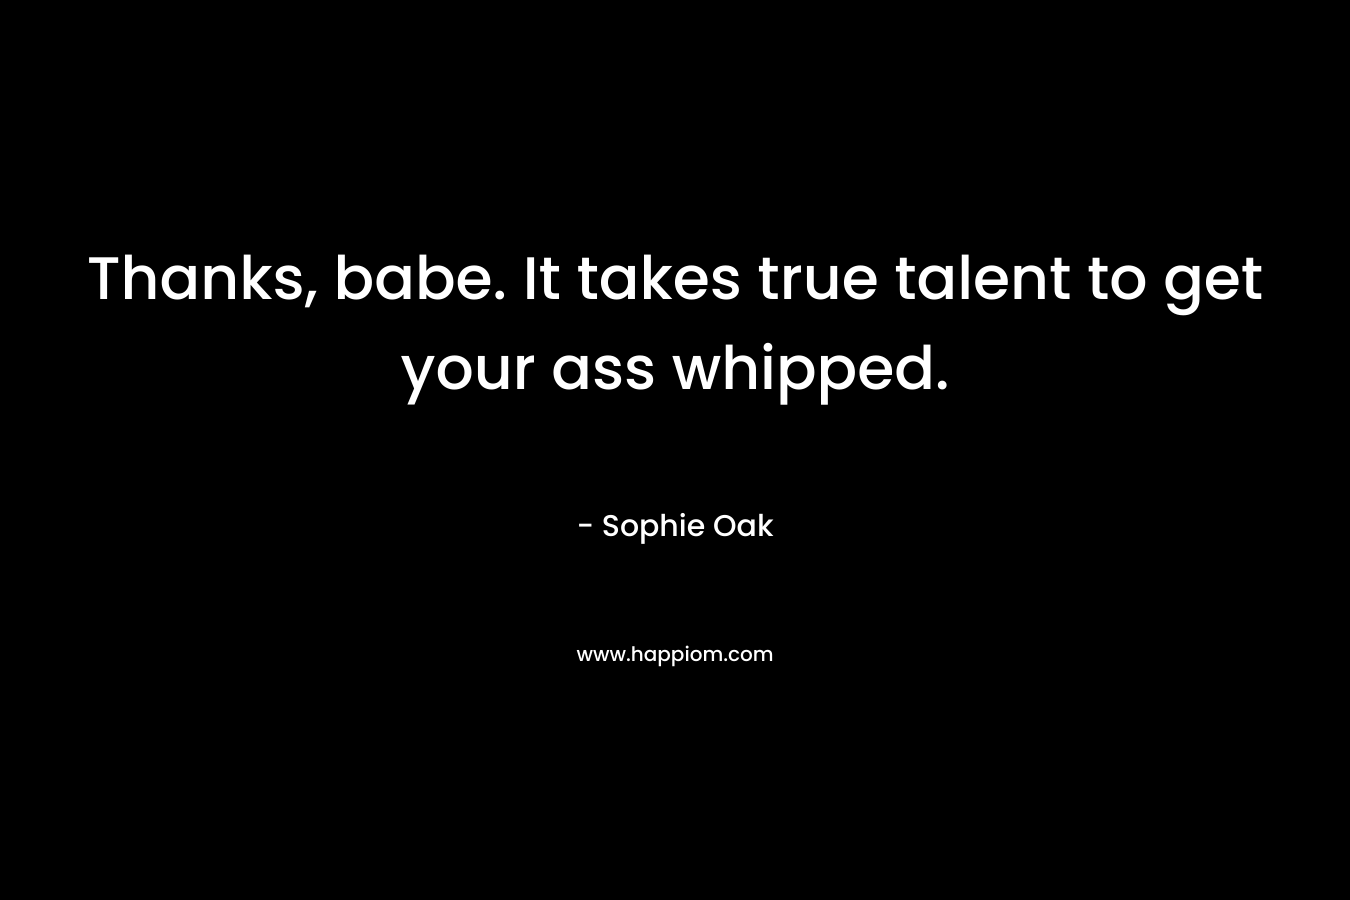 Thanks, babe. It takes true talent to get your ass whipped.